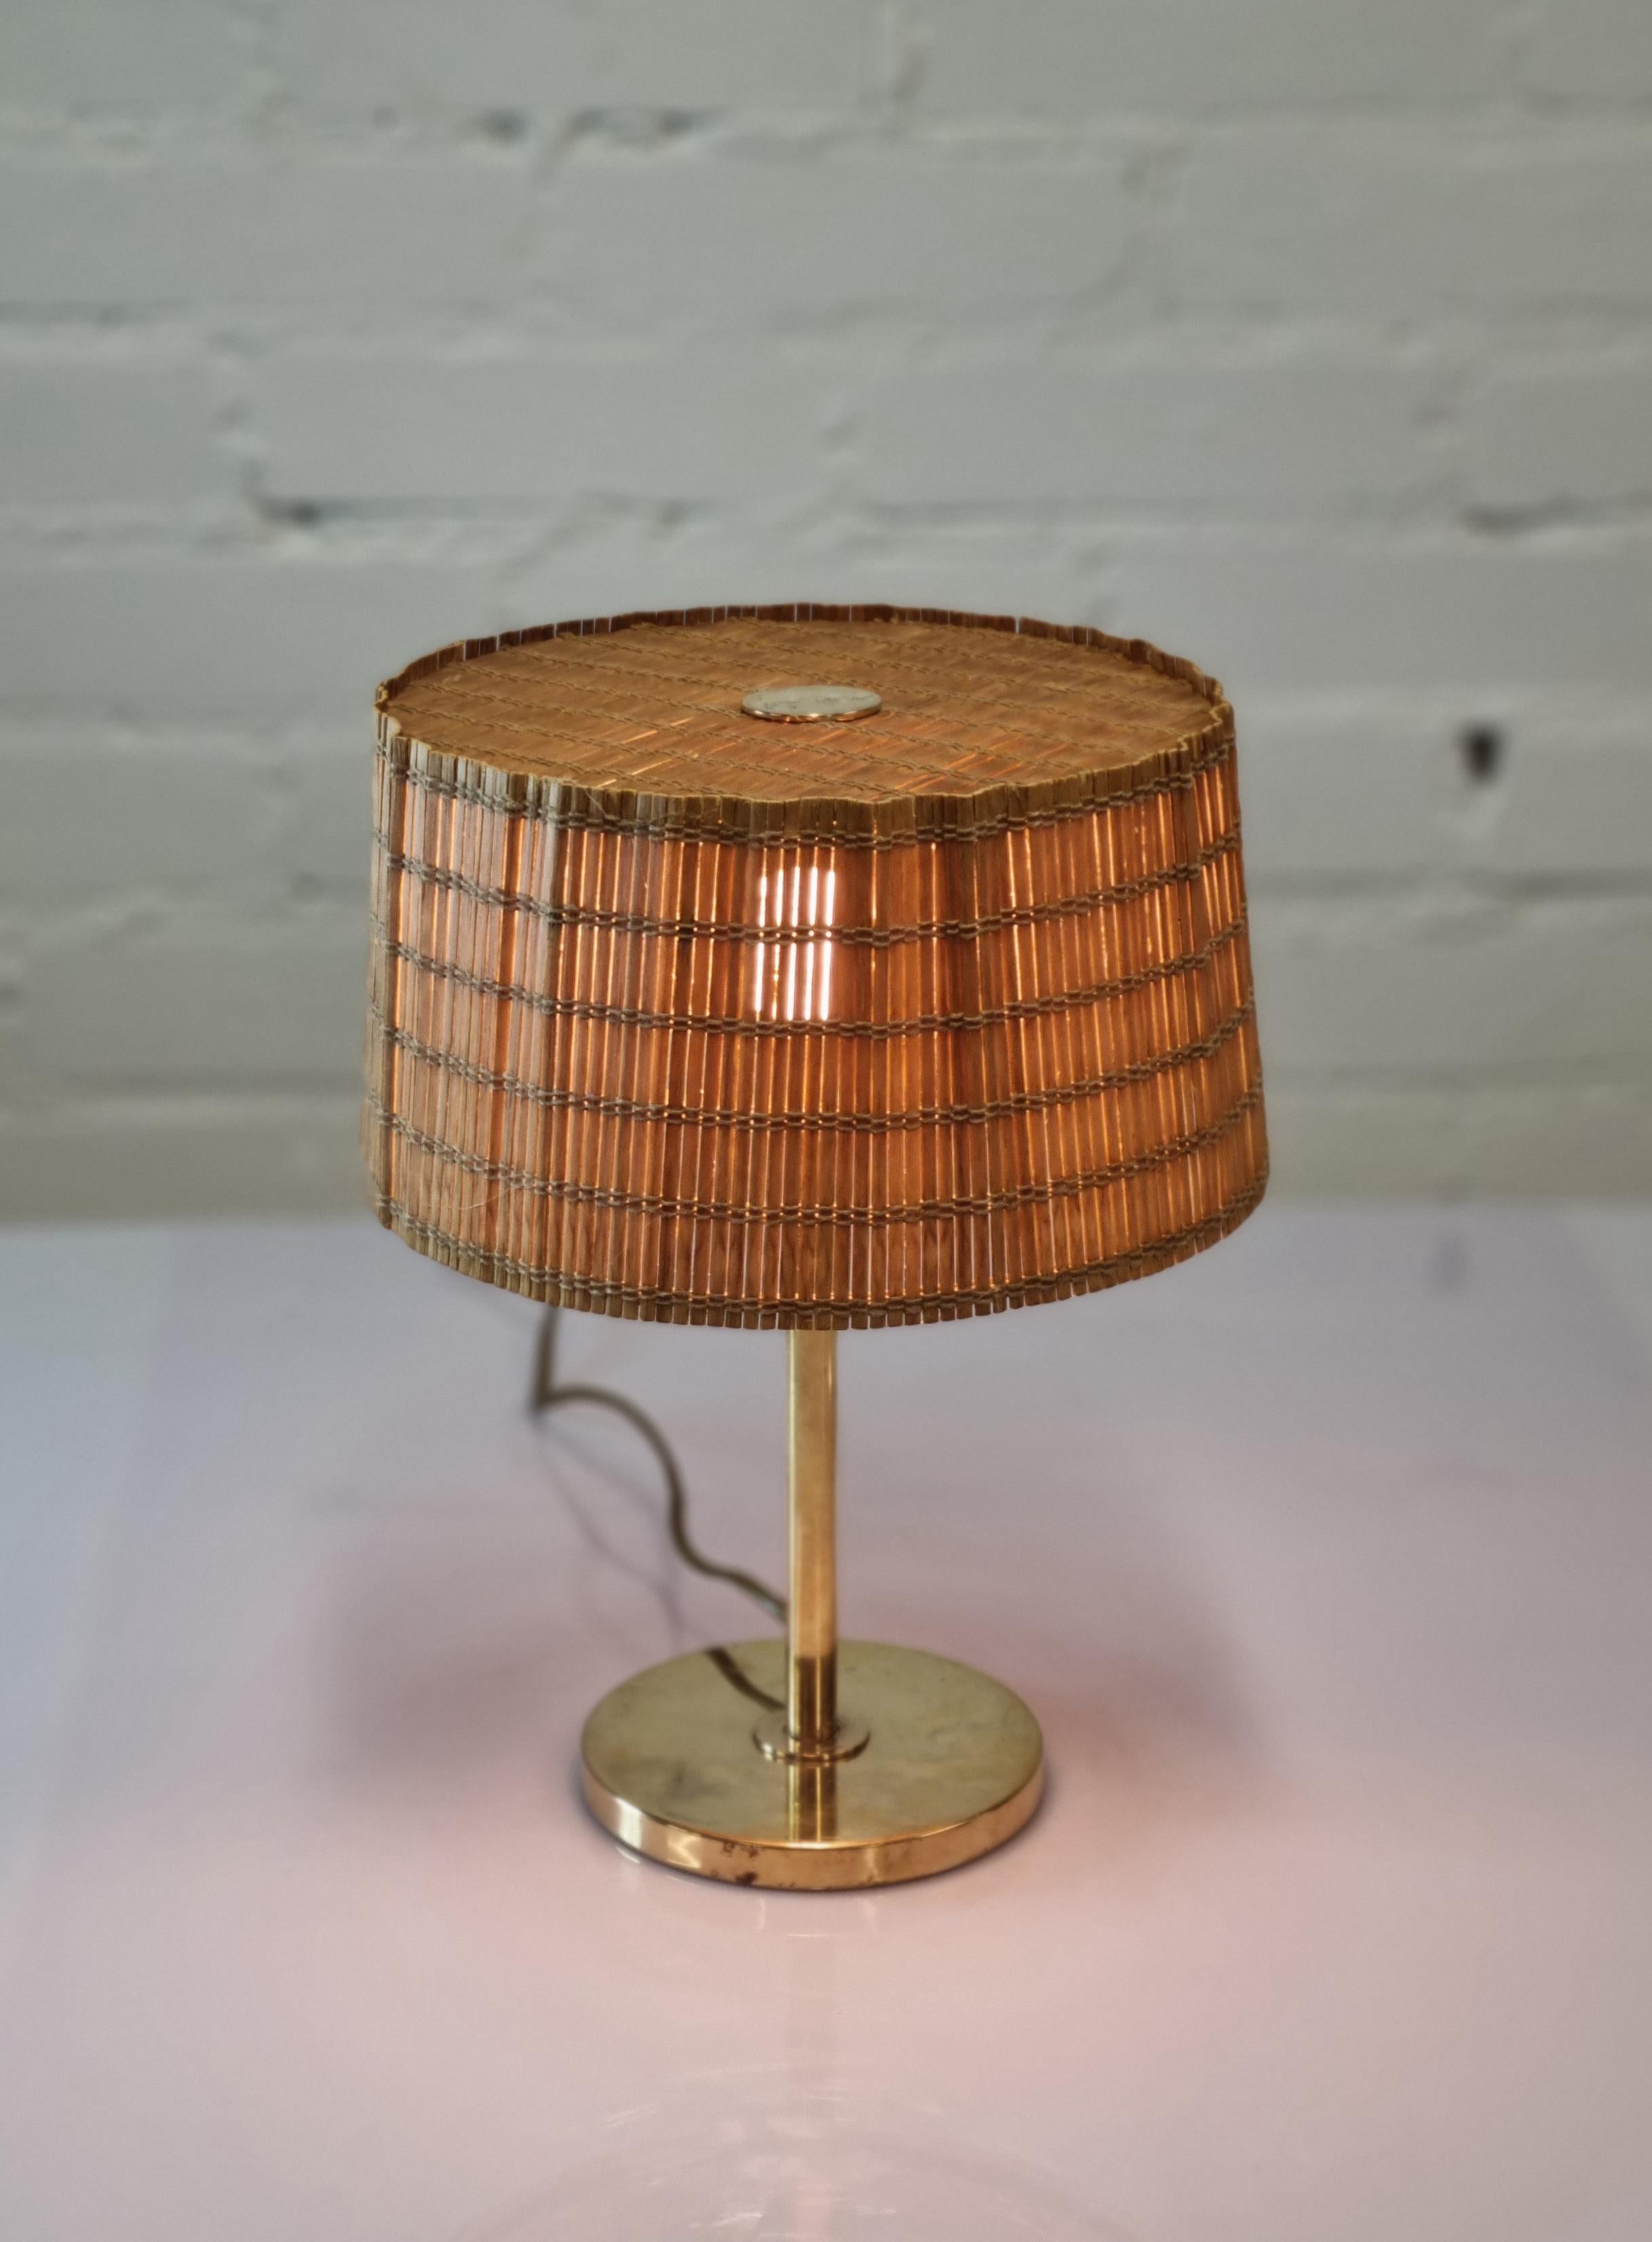 A beautiful bijou early Tynell lamp in solid brass. Simple, elegant and can be easily moved and situated in different spaces. 
The lamp is stamped Oy Taito Ab and Taito to the bottom. All parts are original and the shade is renewed with rattan. The